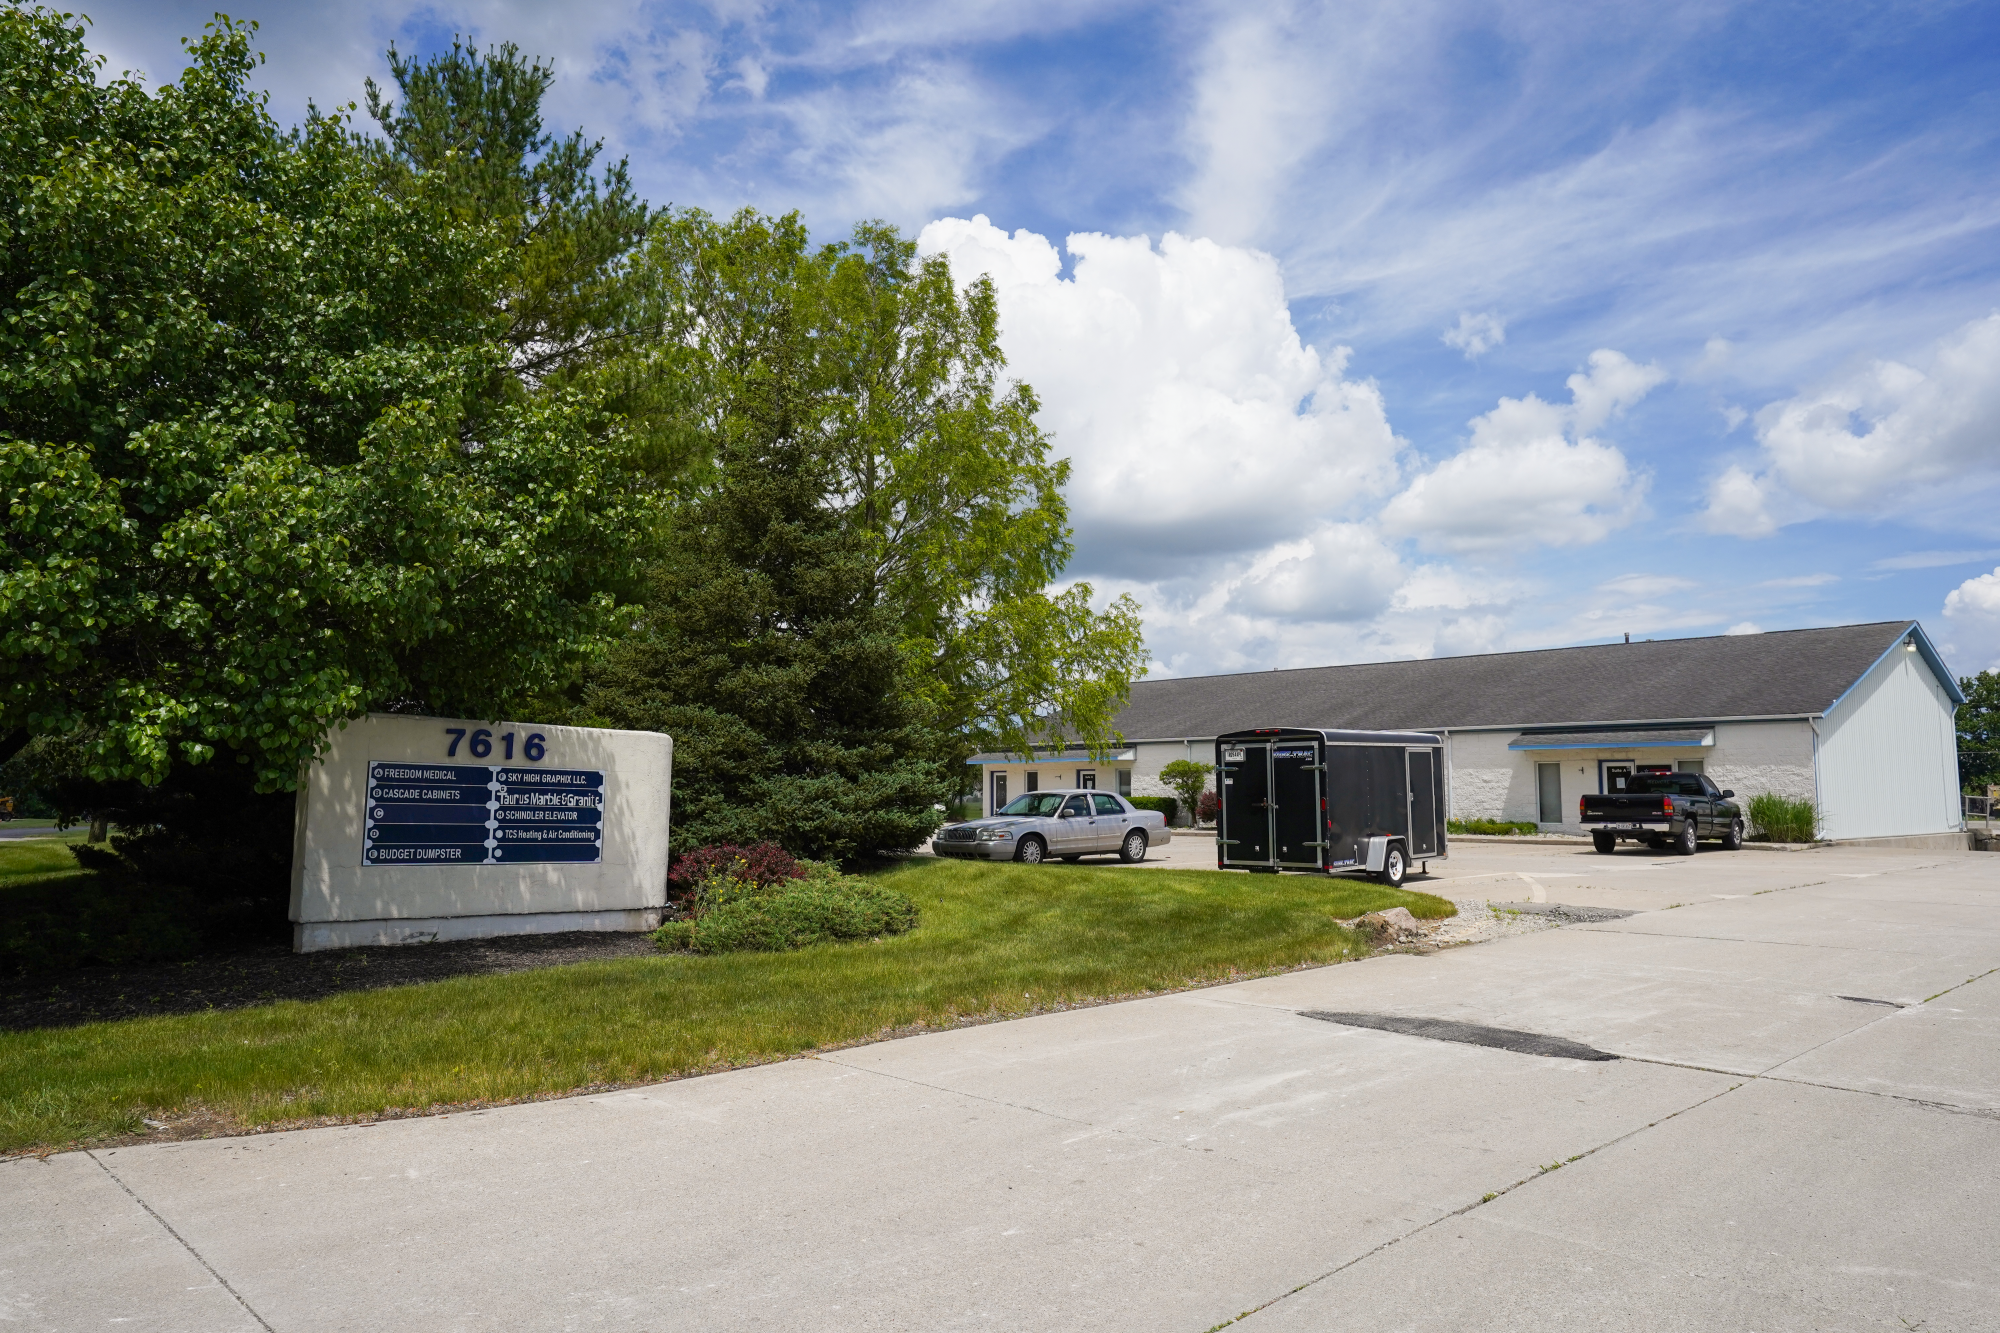 Sturges Property Group - Industrial space for lease north Fort Wayne Indiana commercial real estate